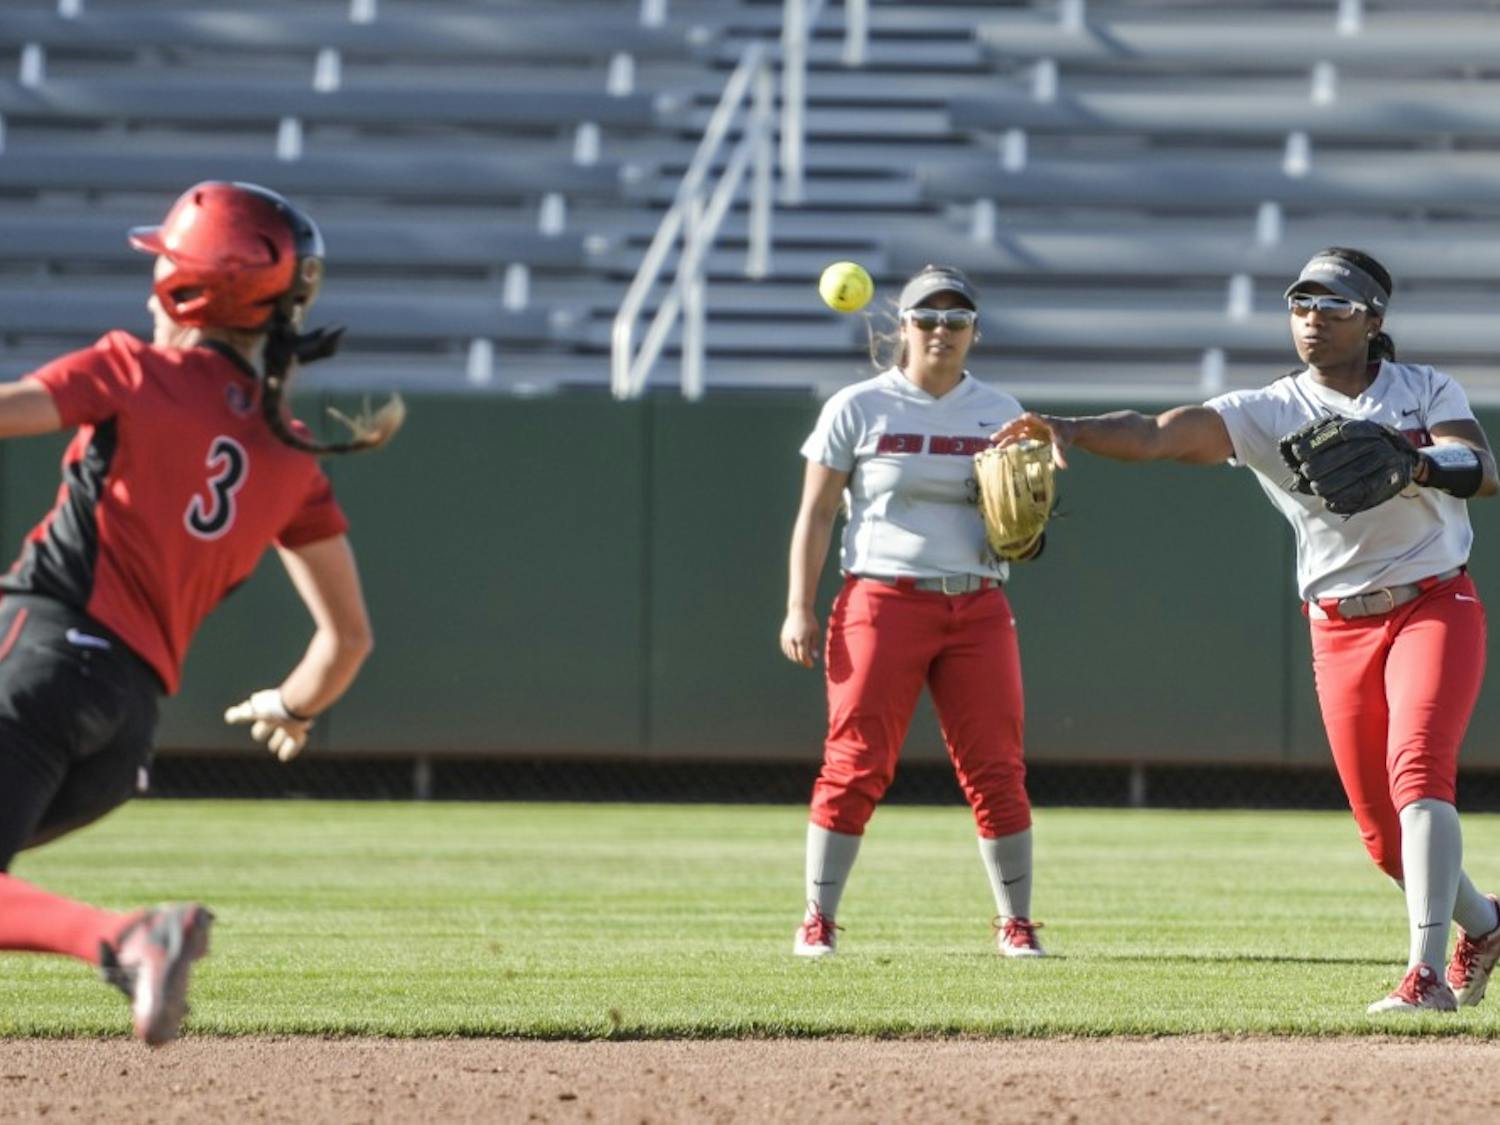 Senior outfielder Mariah Rimmer&nbsp;throws the ball to second base to out a San Diego State player Friday May 6, 2016. The Lobos lost to the Aztecs 2-1 Saturday afternoon in their second of three games.&nbsp;